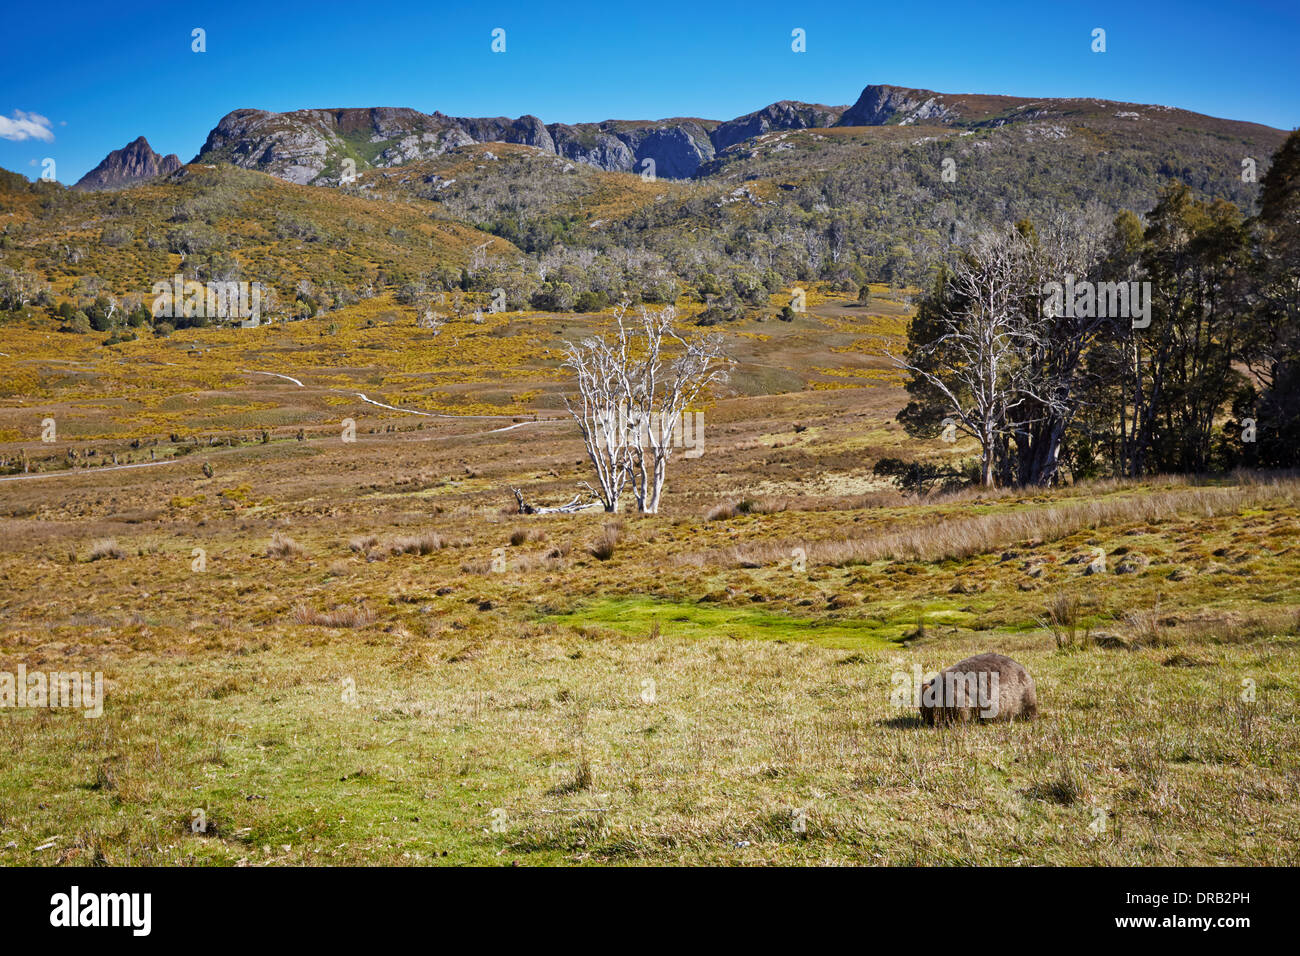 Amazing views in Cradle Mountain - Lake St Clair National Park with wombat eating grass Stock Photo